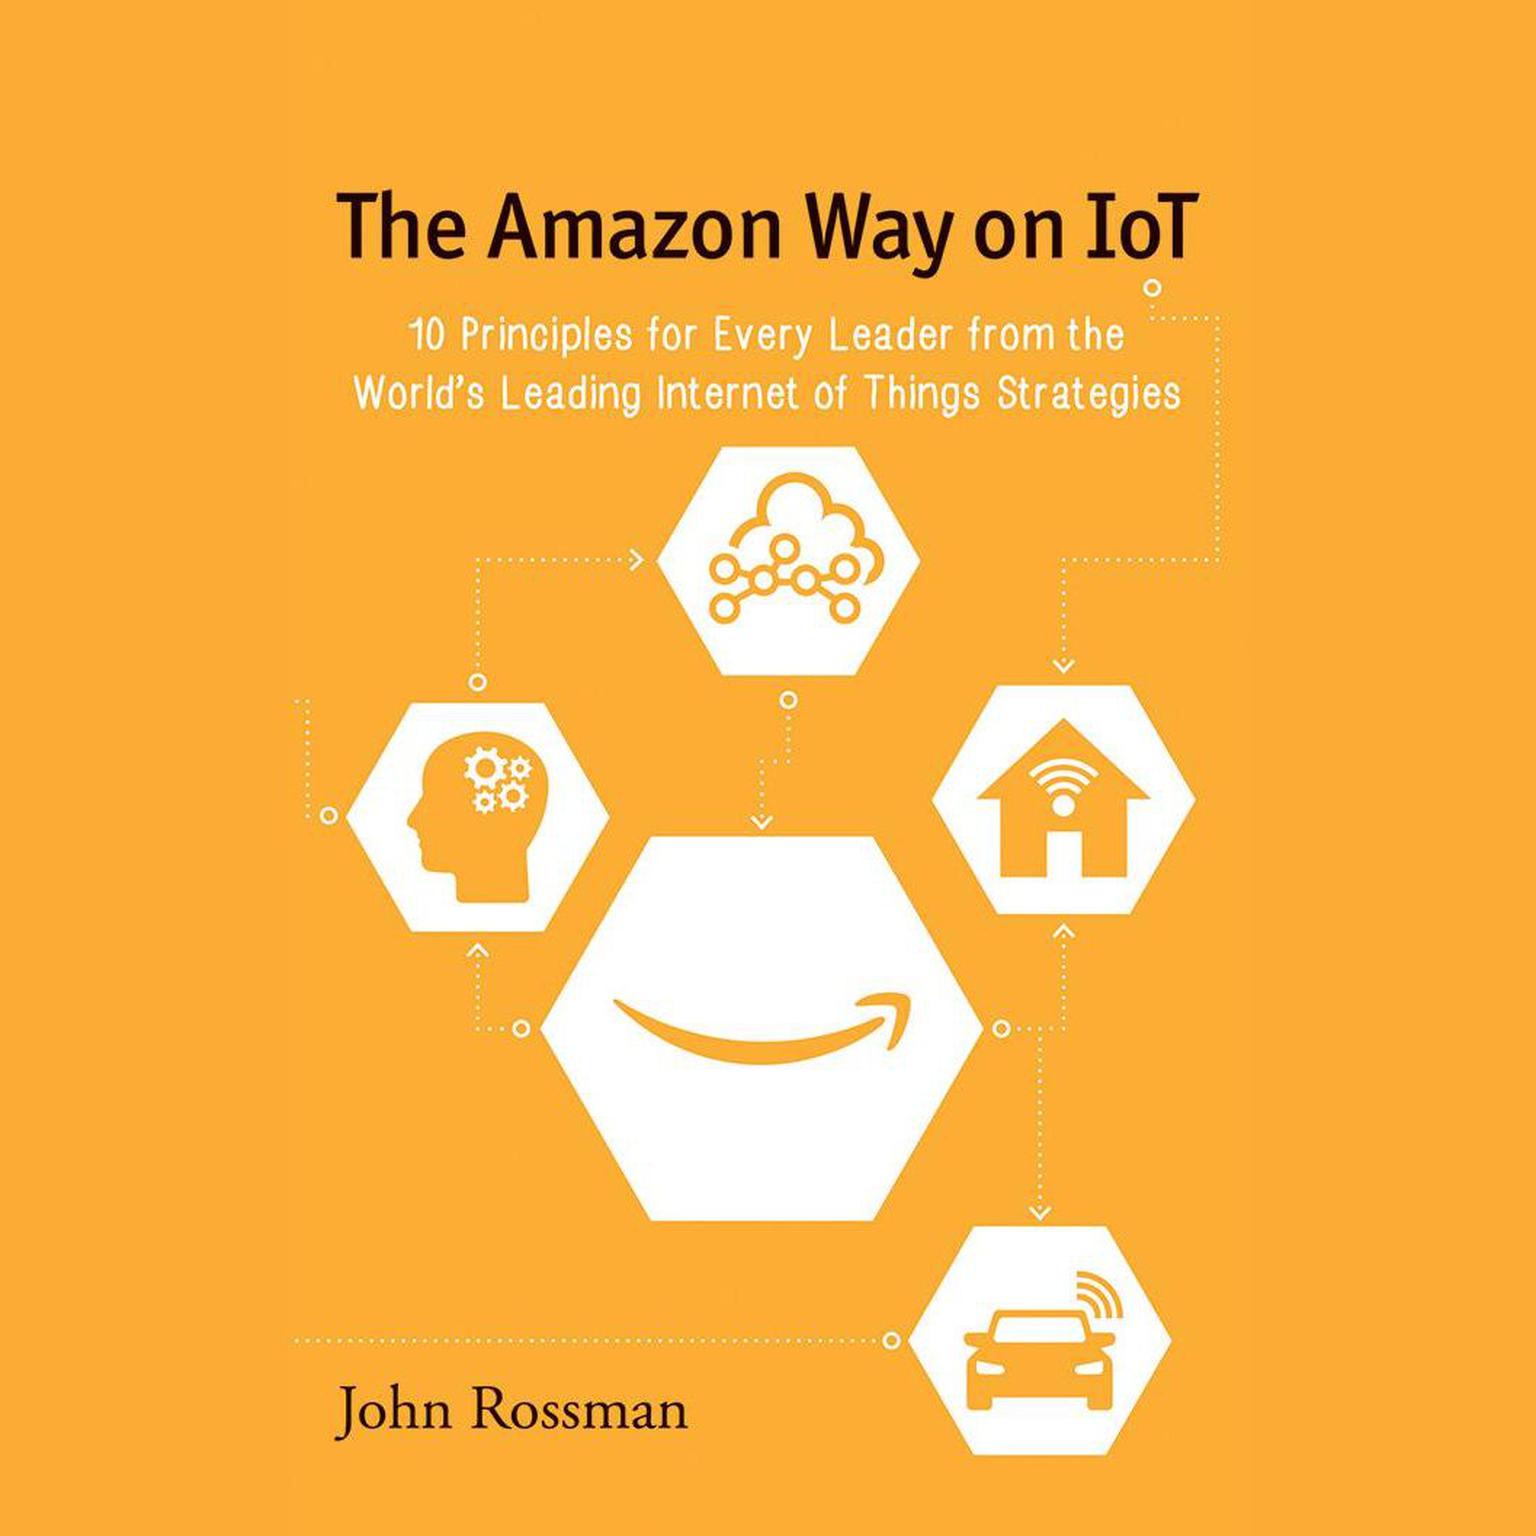 The Amazon Way on IoT: 10 Principles for Every Leader from the Worlds Leading Internet of Things Strategies Audiobook, by John Rossman